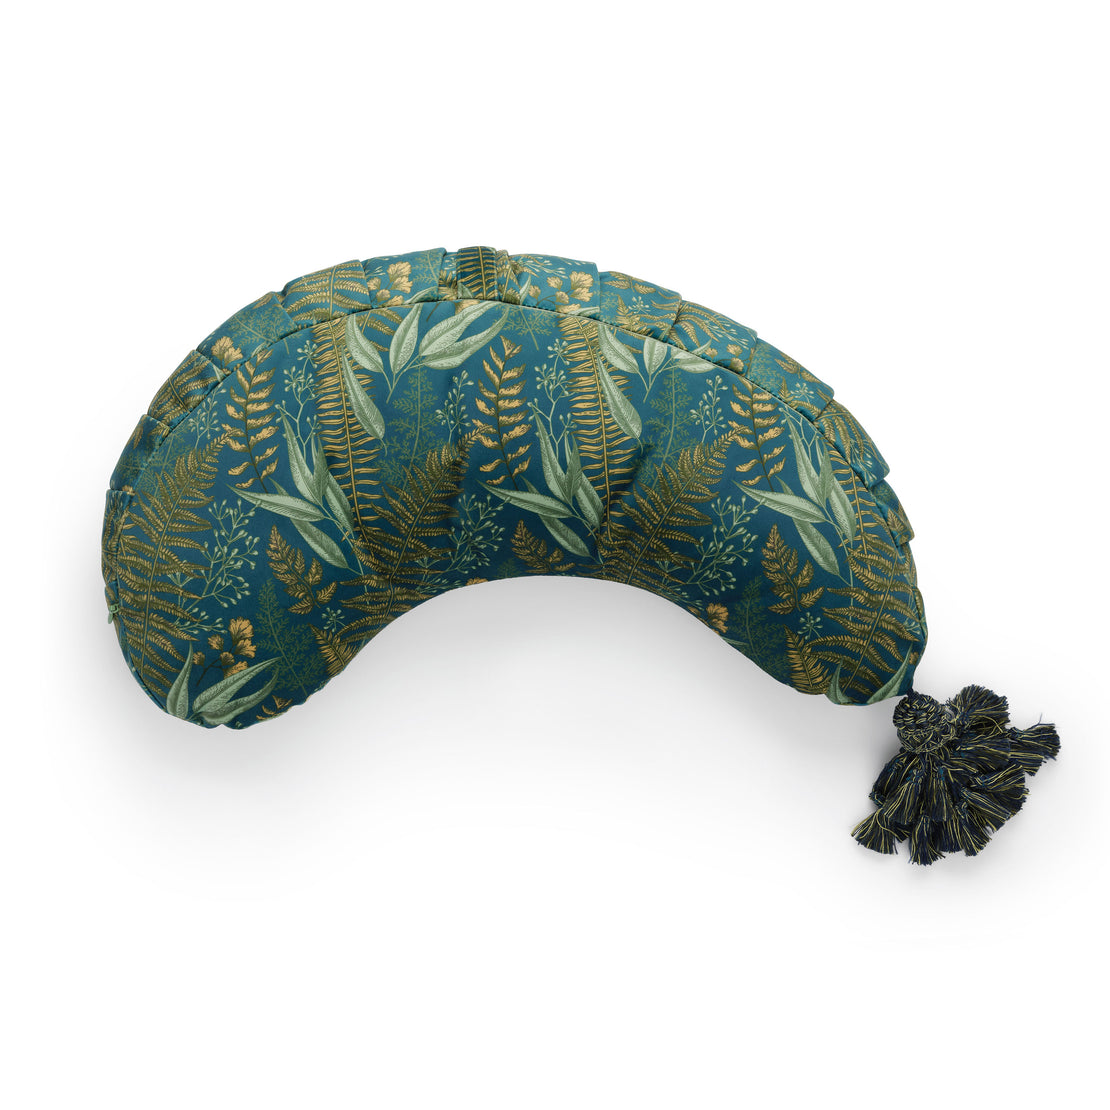 A vibrant teal La Maman Wedge - Navy Night Falls nursing pillow decorated with a golden tropical leaf pattern, featuring a tasseled embellishment on one end. The pillow is shaped to provide neck and breastfeeding support and is isolated on a white background.